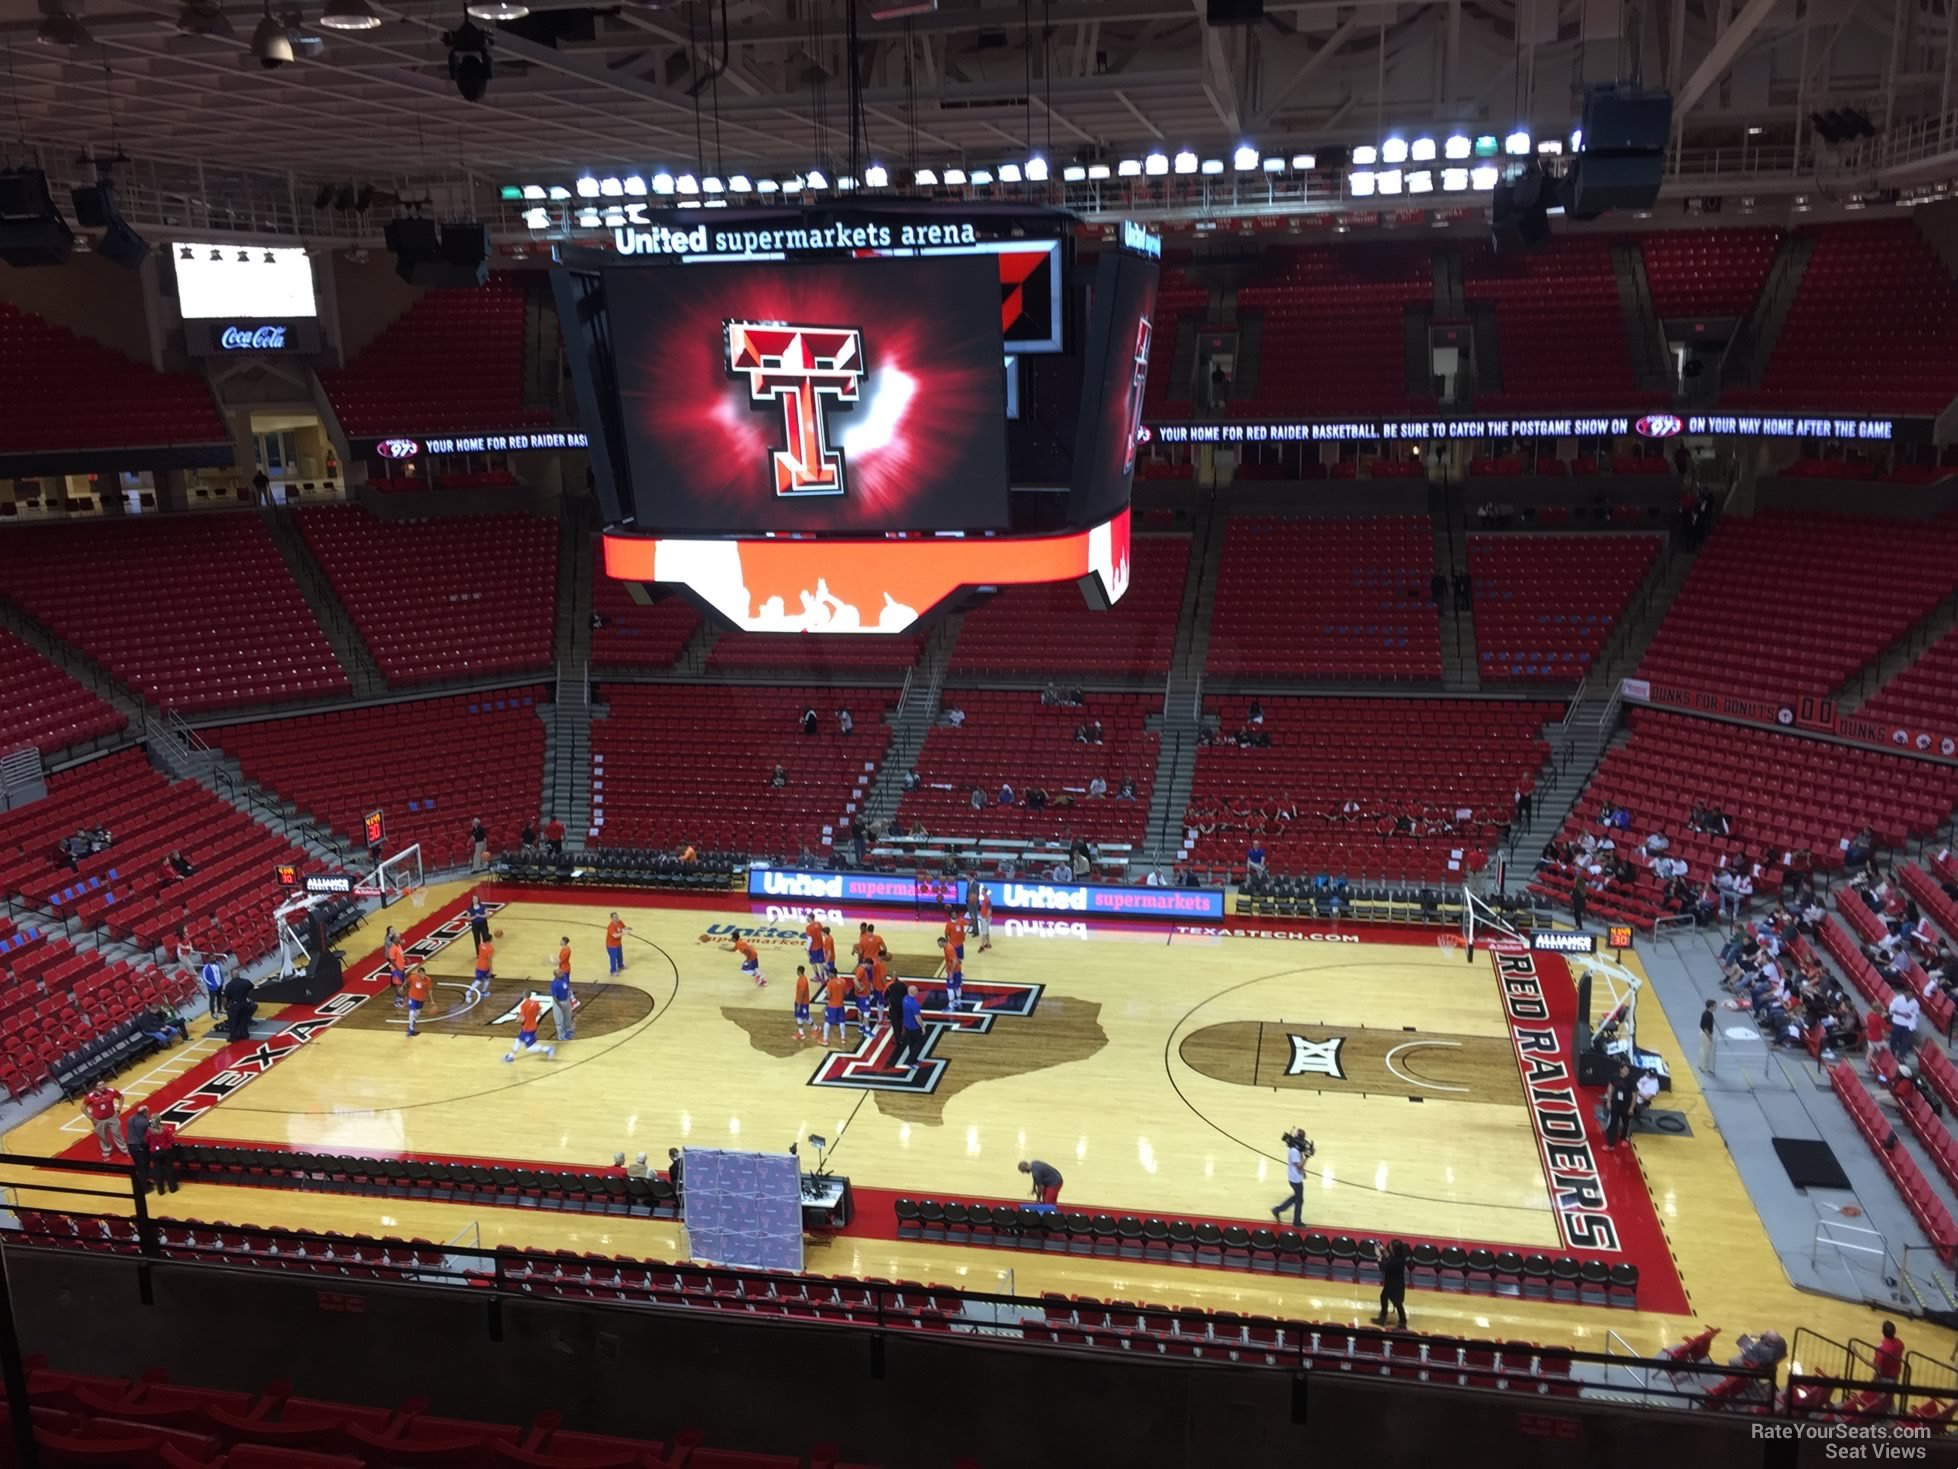 section 232, row 7 seat view  - united supermarkets arena